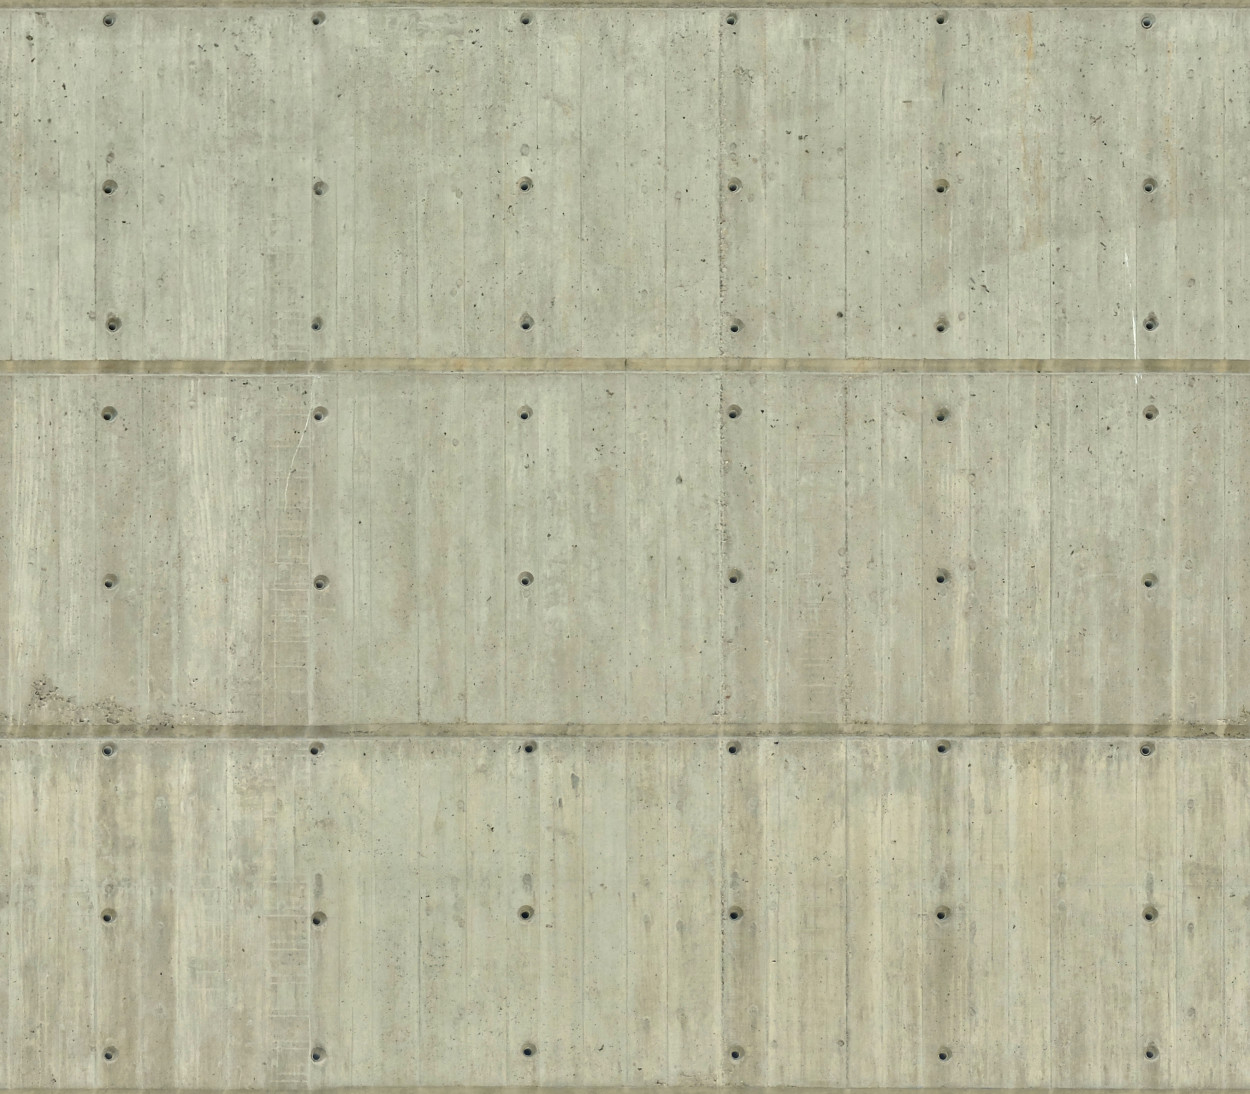 A seamless concrete panels with tie-bolt holes texture for use in architectural drawings and 3D models